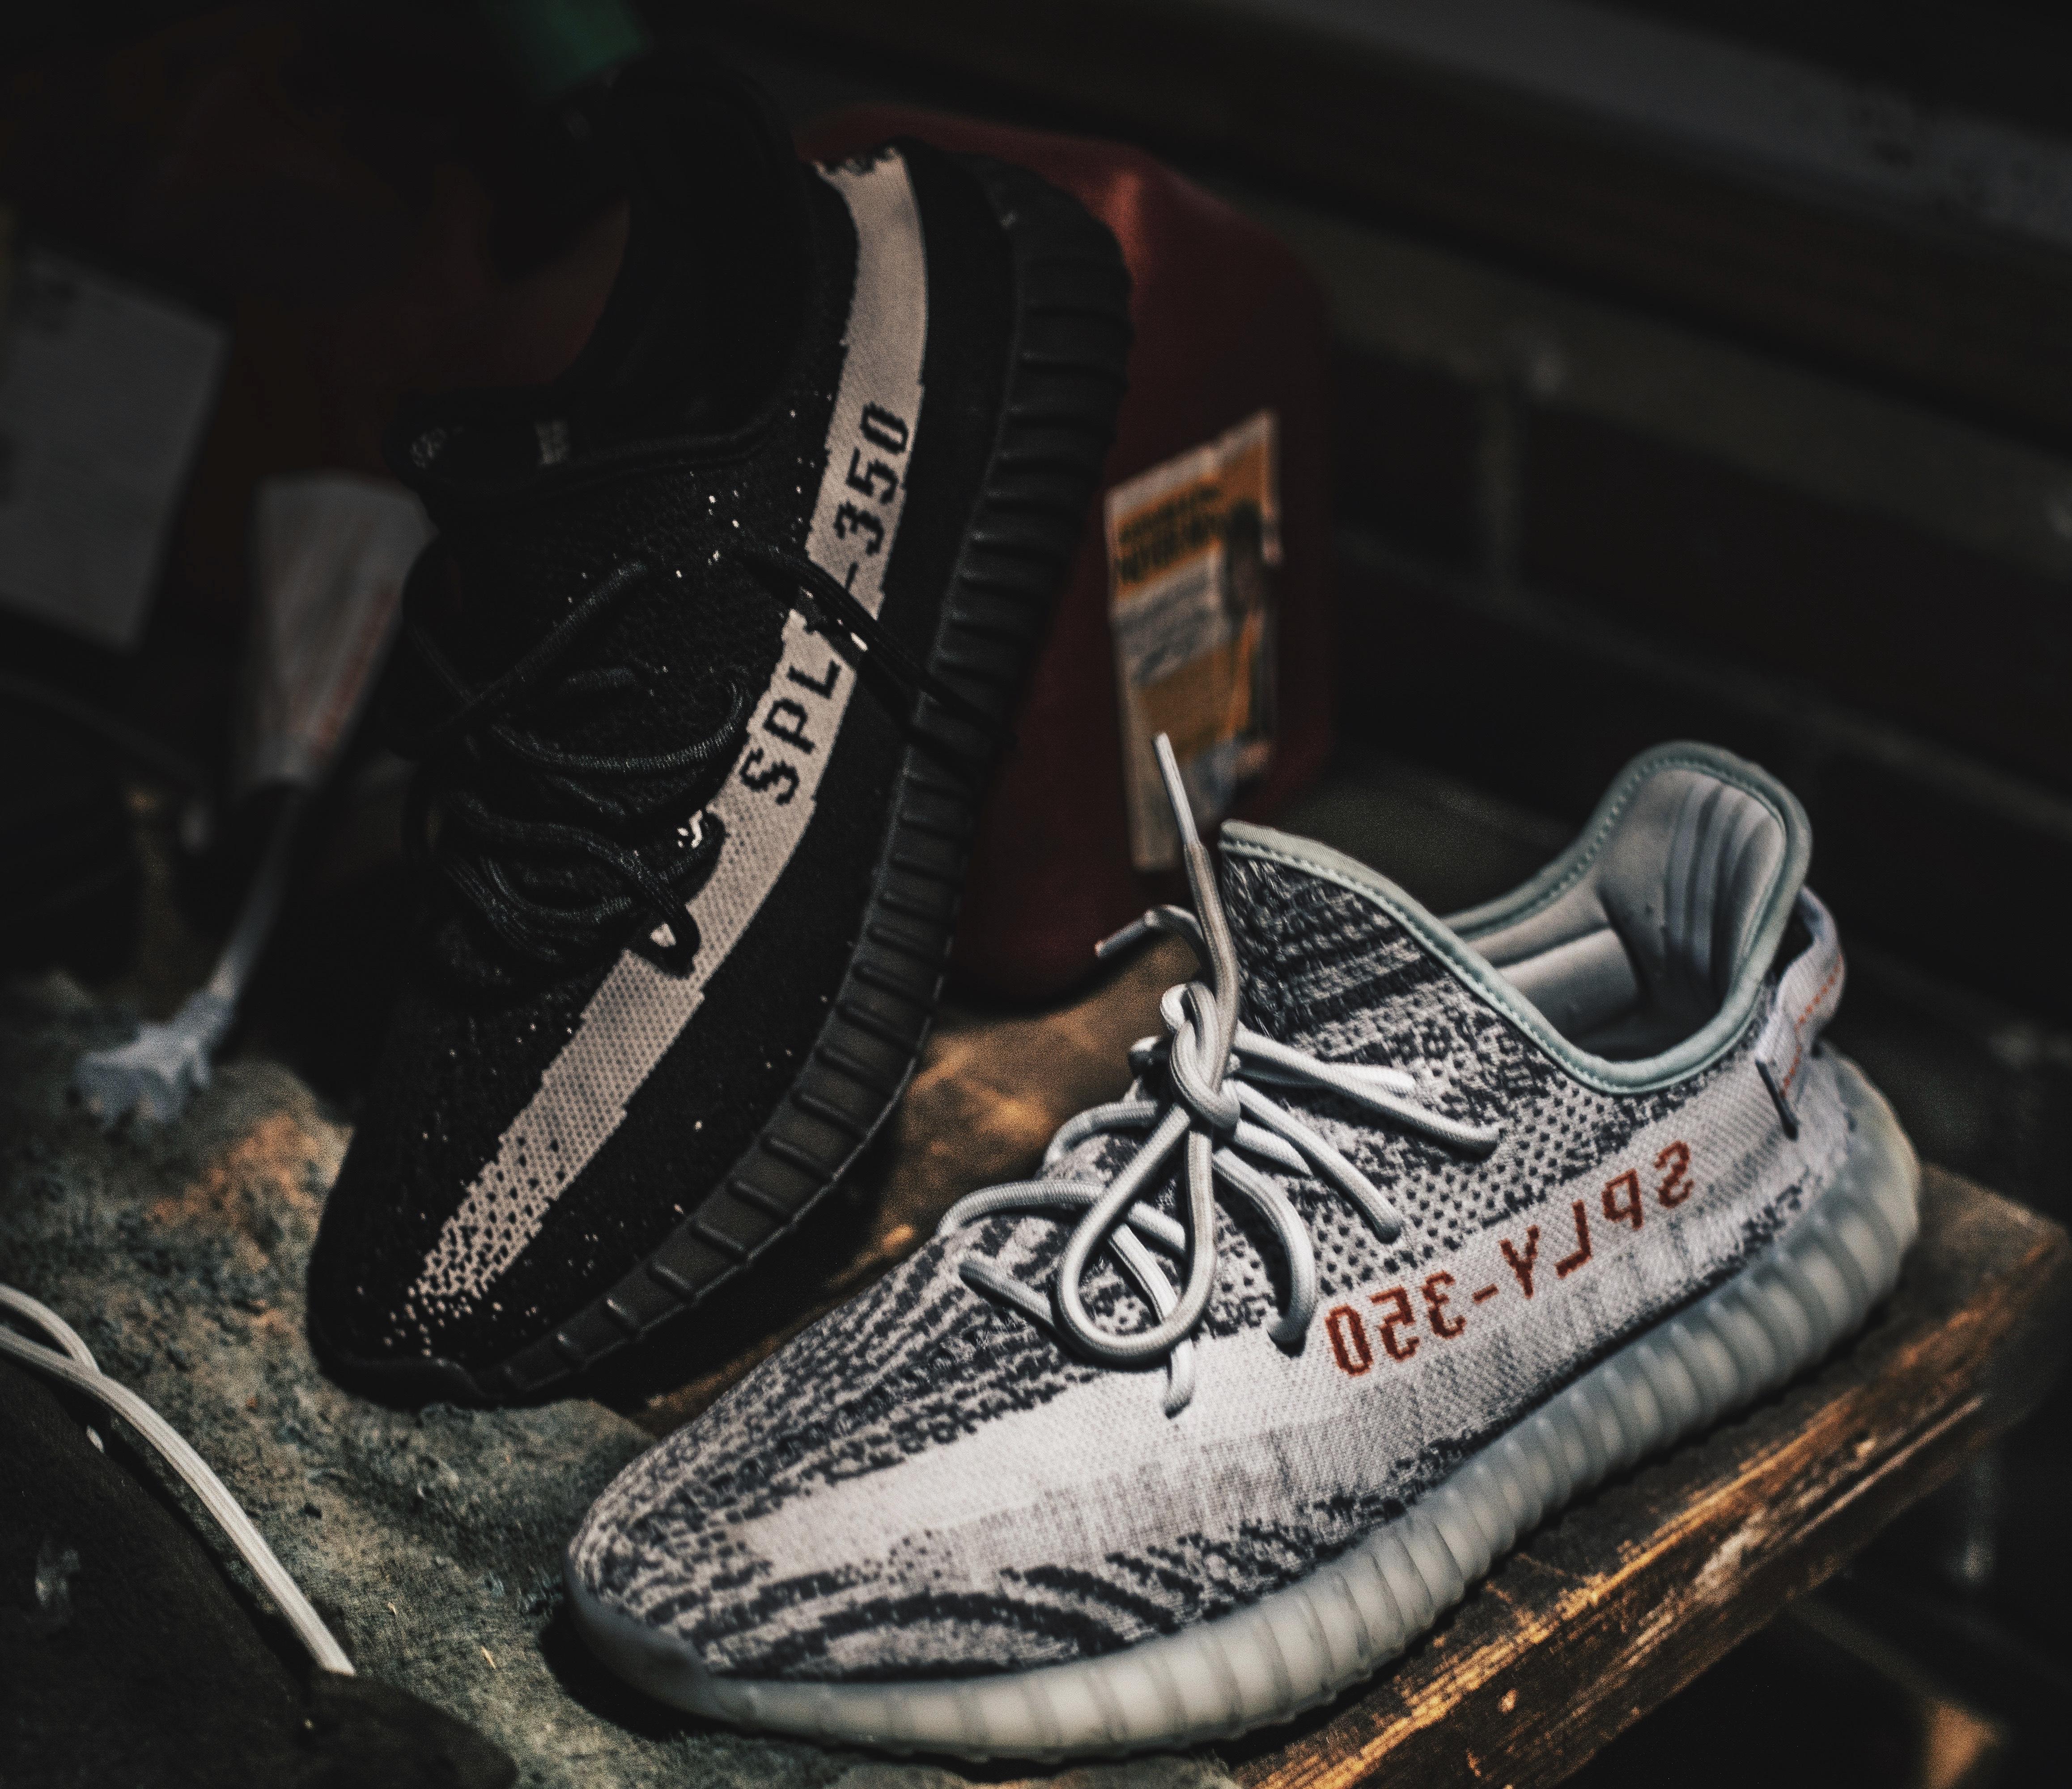 Two Unpaired Black And Gray Adidas Sply 350 V2 Wallpaper